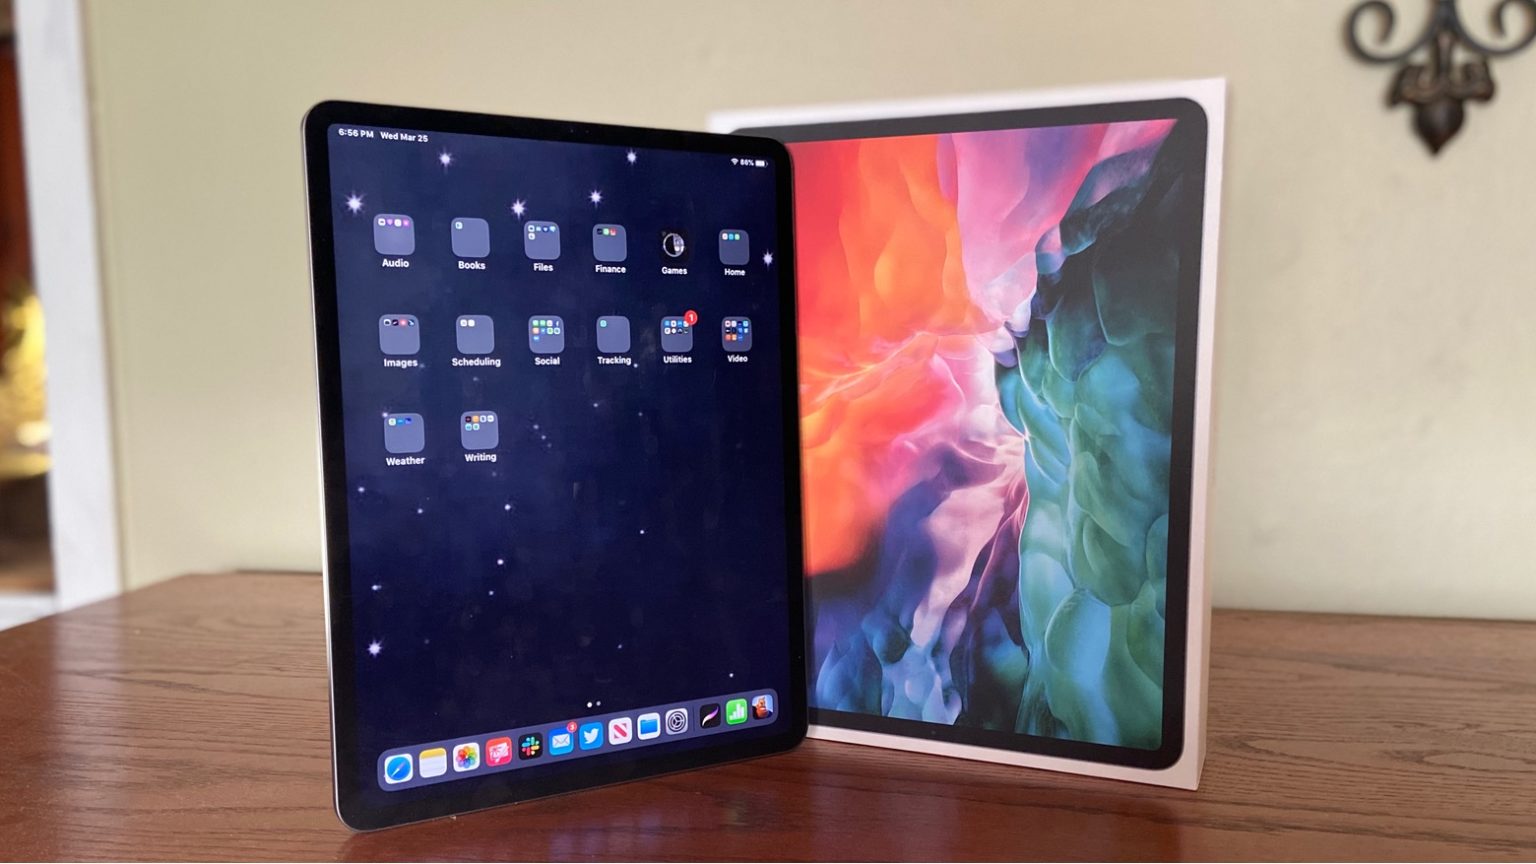 2020 iPad Pro builds on the 2018 model.